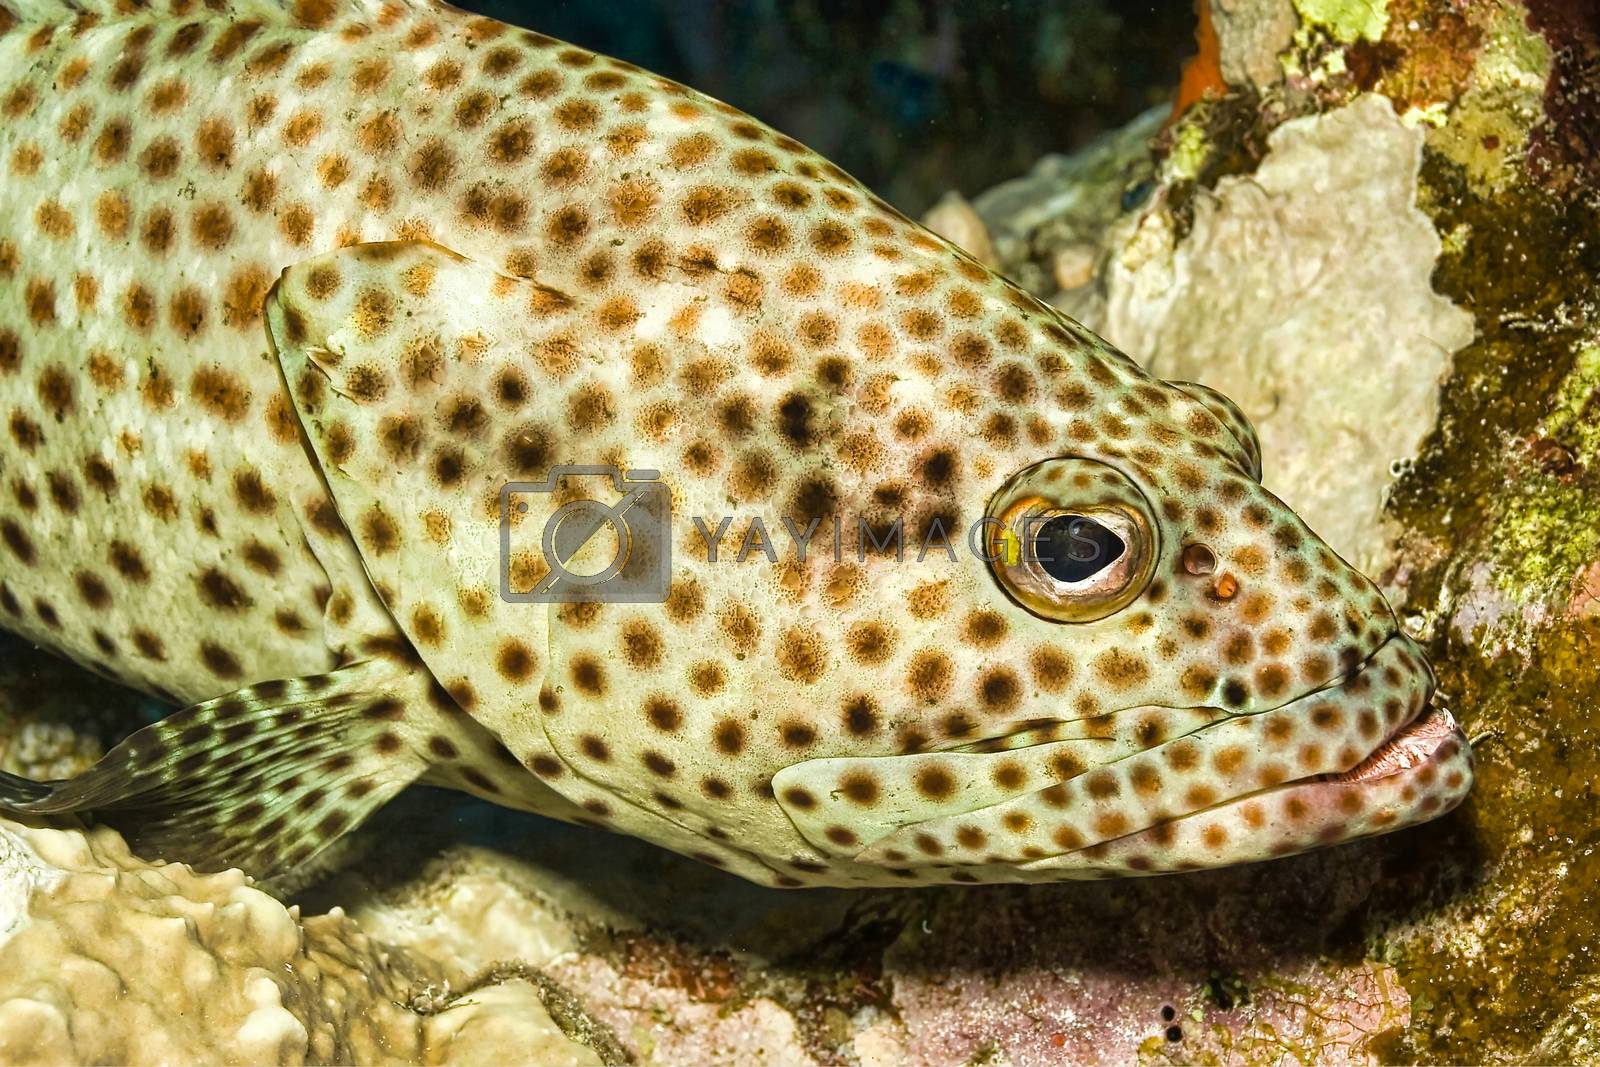 Royalty free image of Coral Grouper, Coral Reef, Red Sea, Egypt by alcaproac